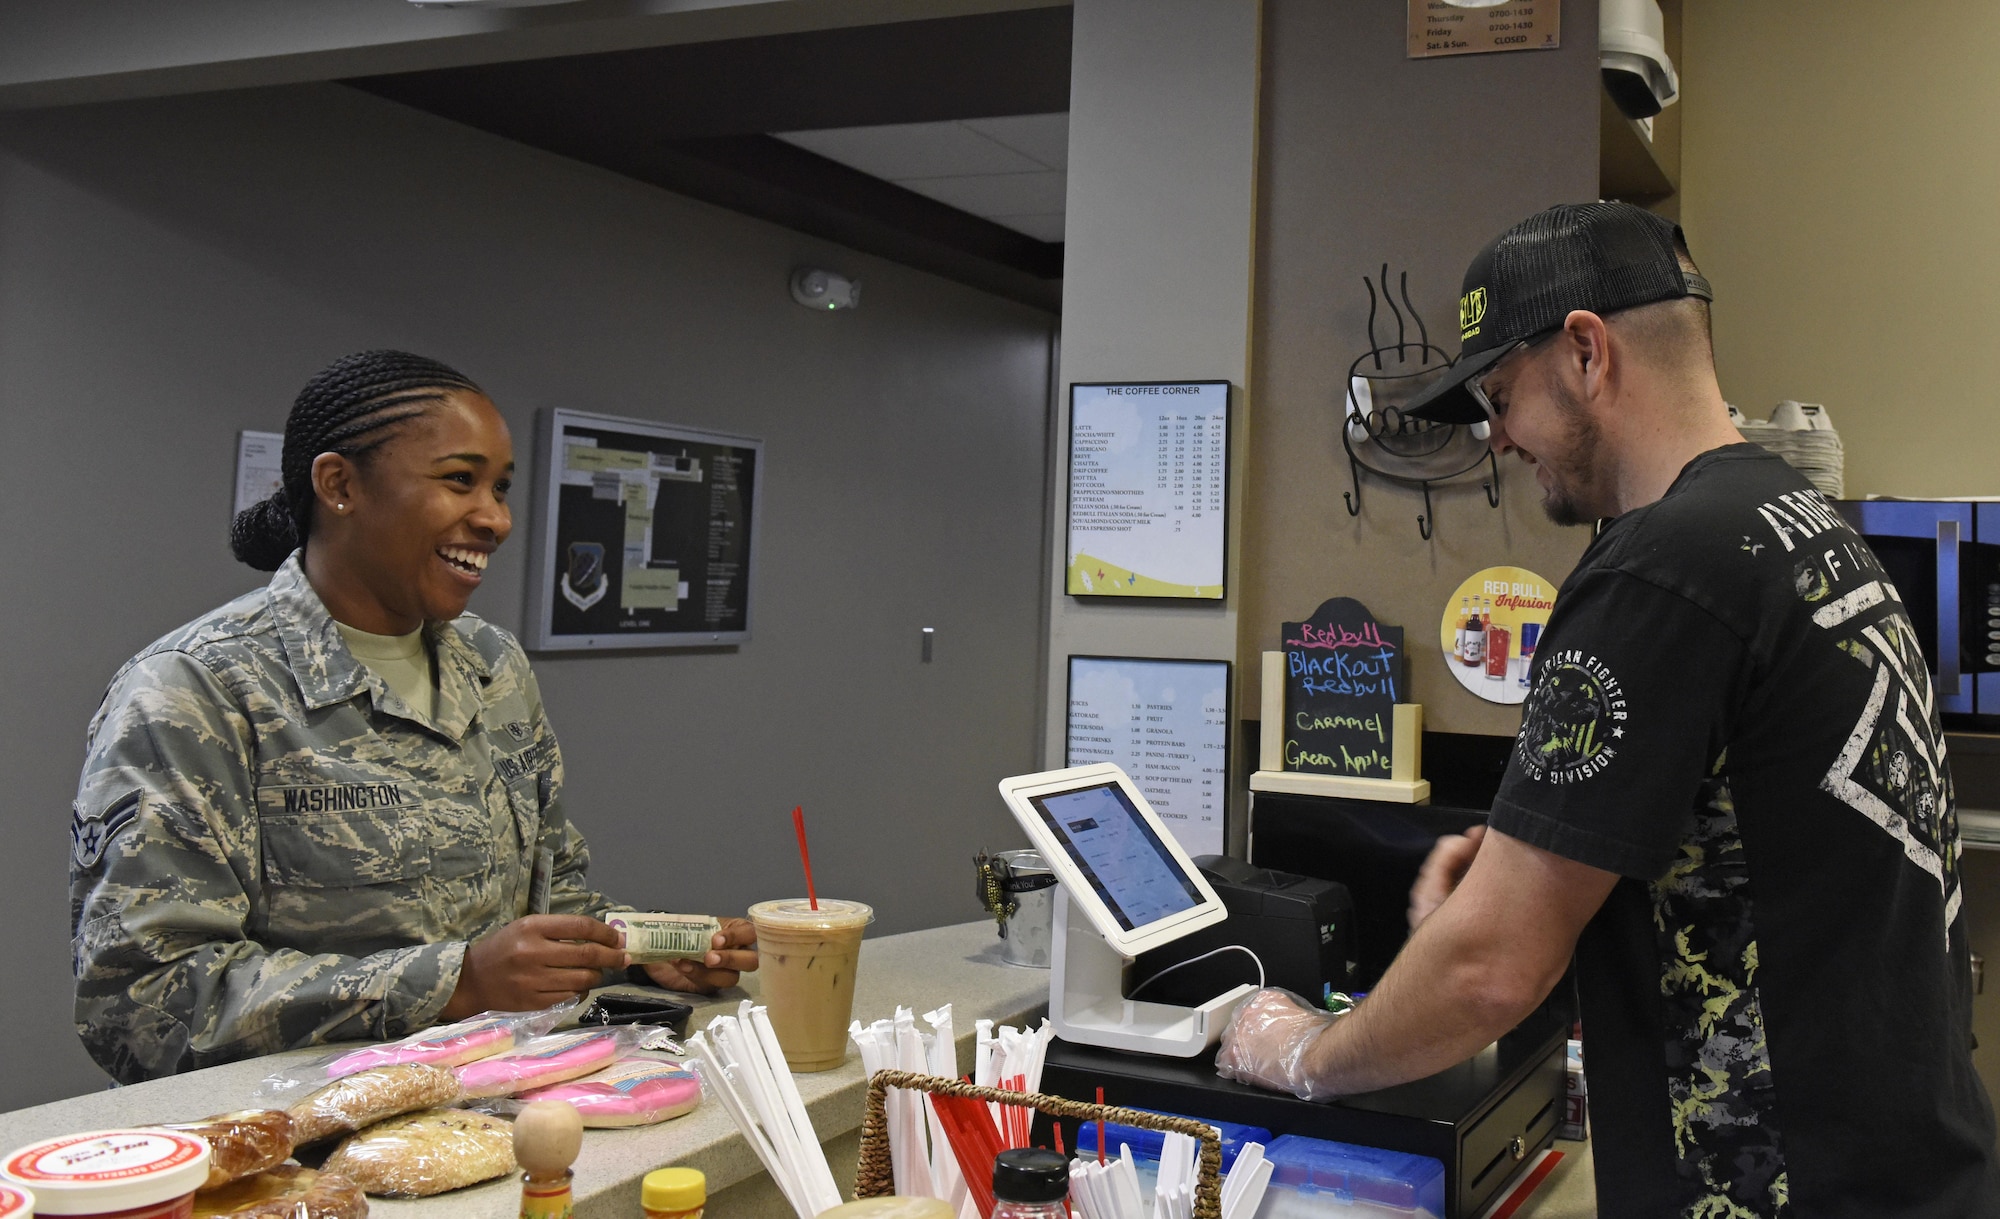 Larry Bowman, U.S. Air Force retiree and owner of the Coffee Corner, cashes out a customer at Fairchild Air Force Base, Wash., Sept. 26, 2017. Bowman enlisted July 2001, and was stationed at Fairchild for 14 years, during which he was a flight chief for a section of crew chiefs and deployed overseas seven times. He retired June 2015, and stayed in the local area. (U.S. Air Force photo/Airman 1st Class Jesenia Landaverde)